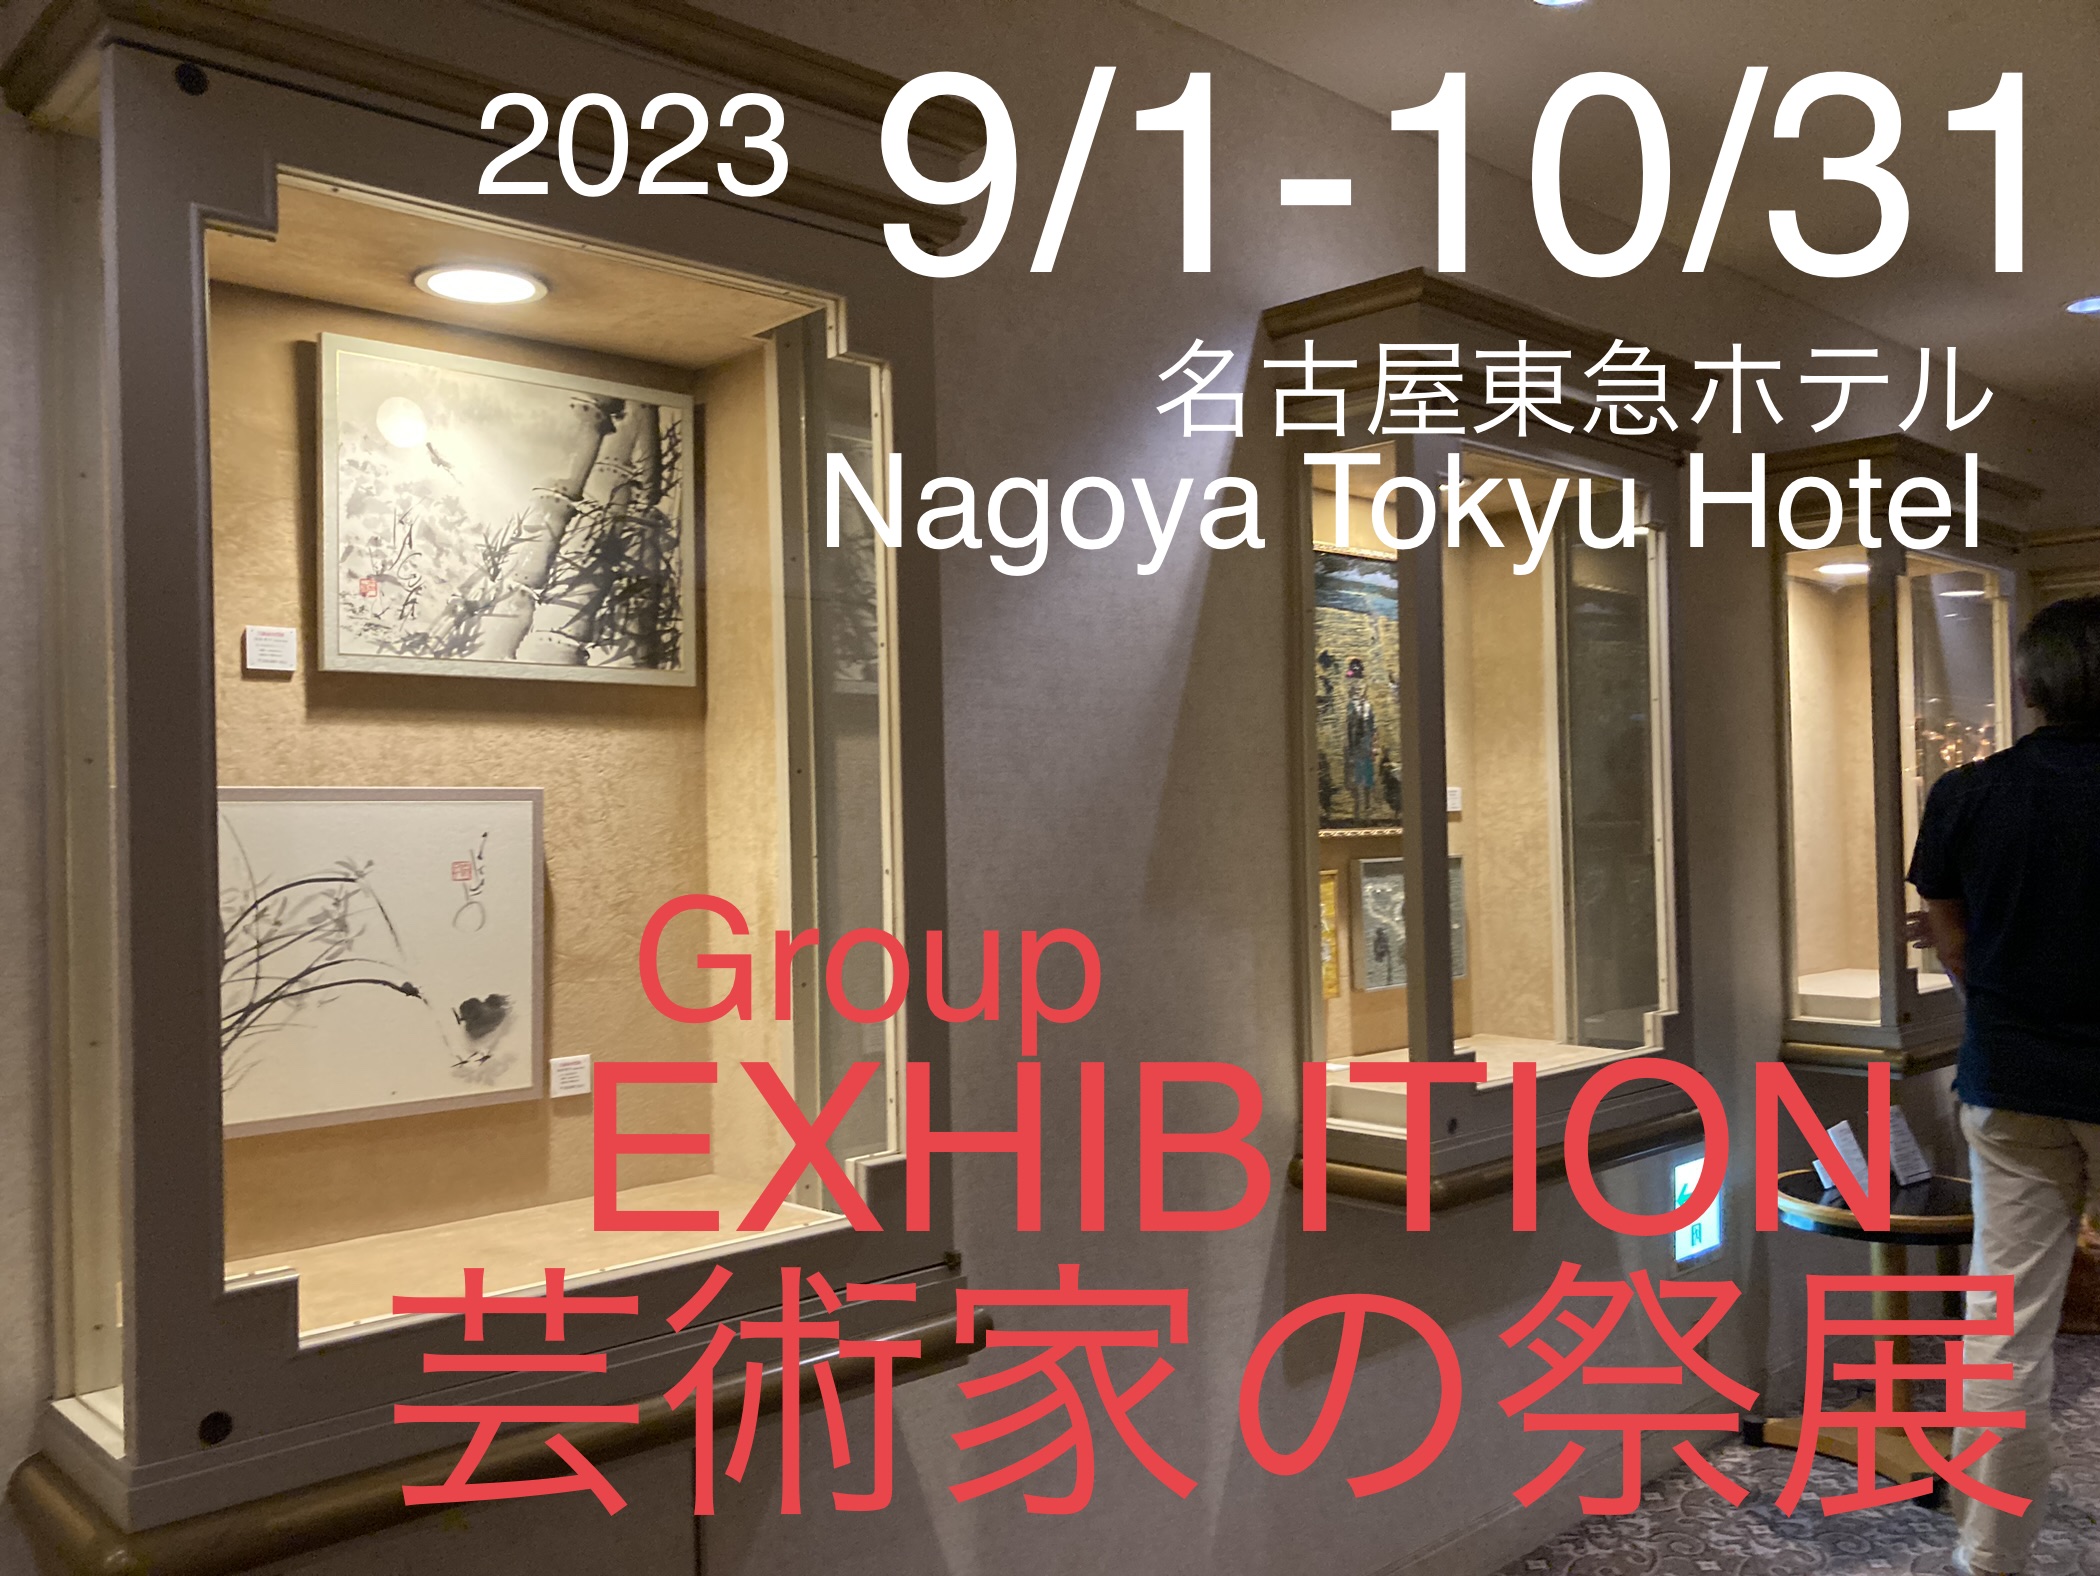 My works will be exhibited in group exhibitions!